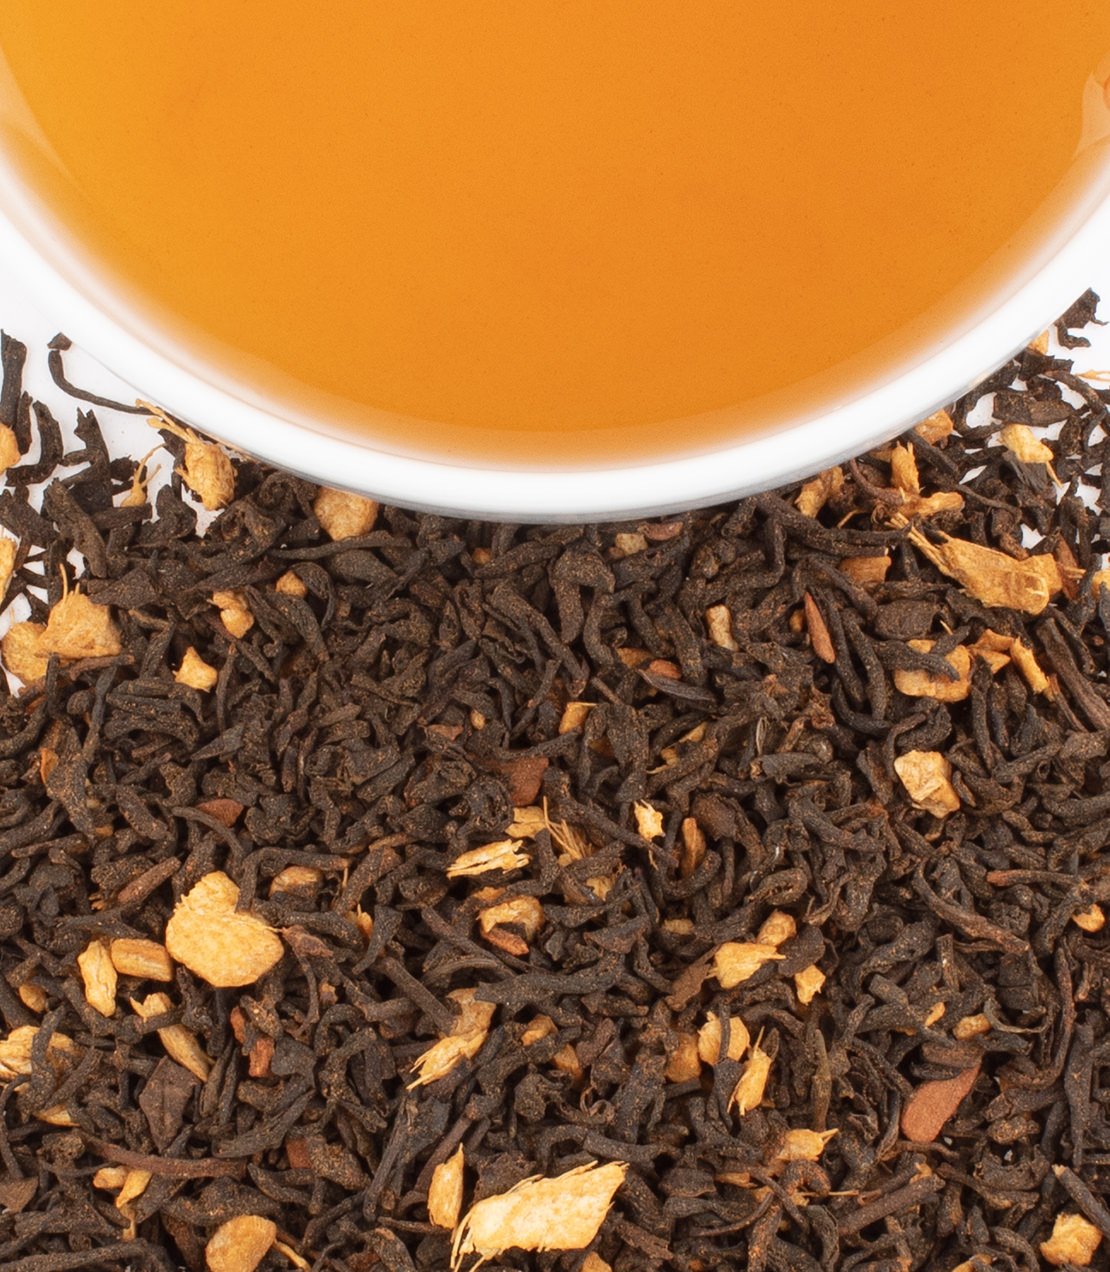 Black tea with gingerbread spices - Ginger, cinnamon, molasses, vanilla - Gingerbread Festival tea by Harney & Sons Europe